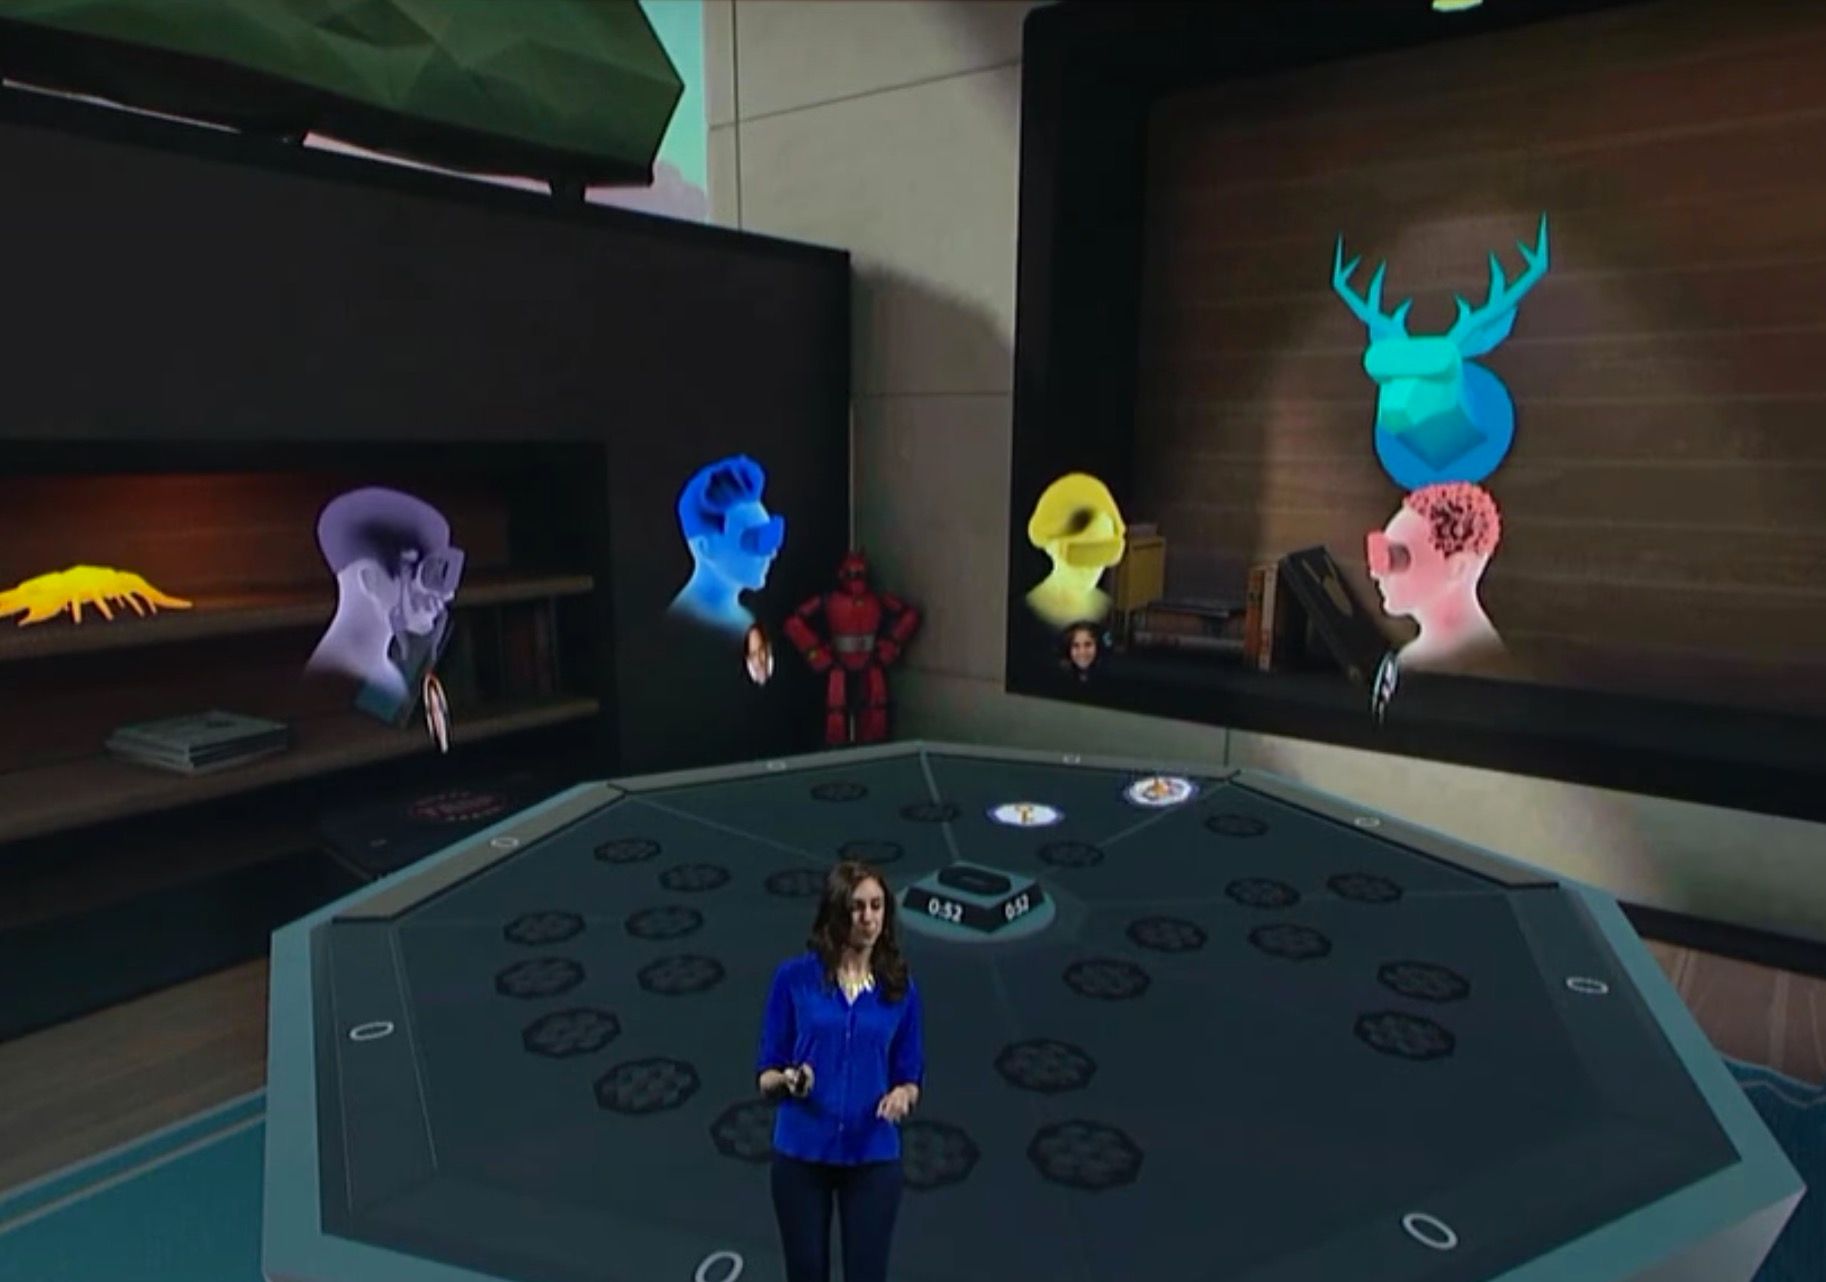 oculus rooms and parties explained how does facebook see us being social in vr image 4